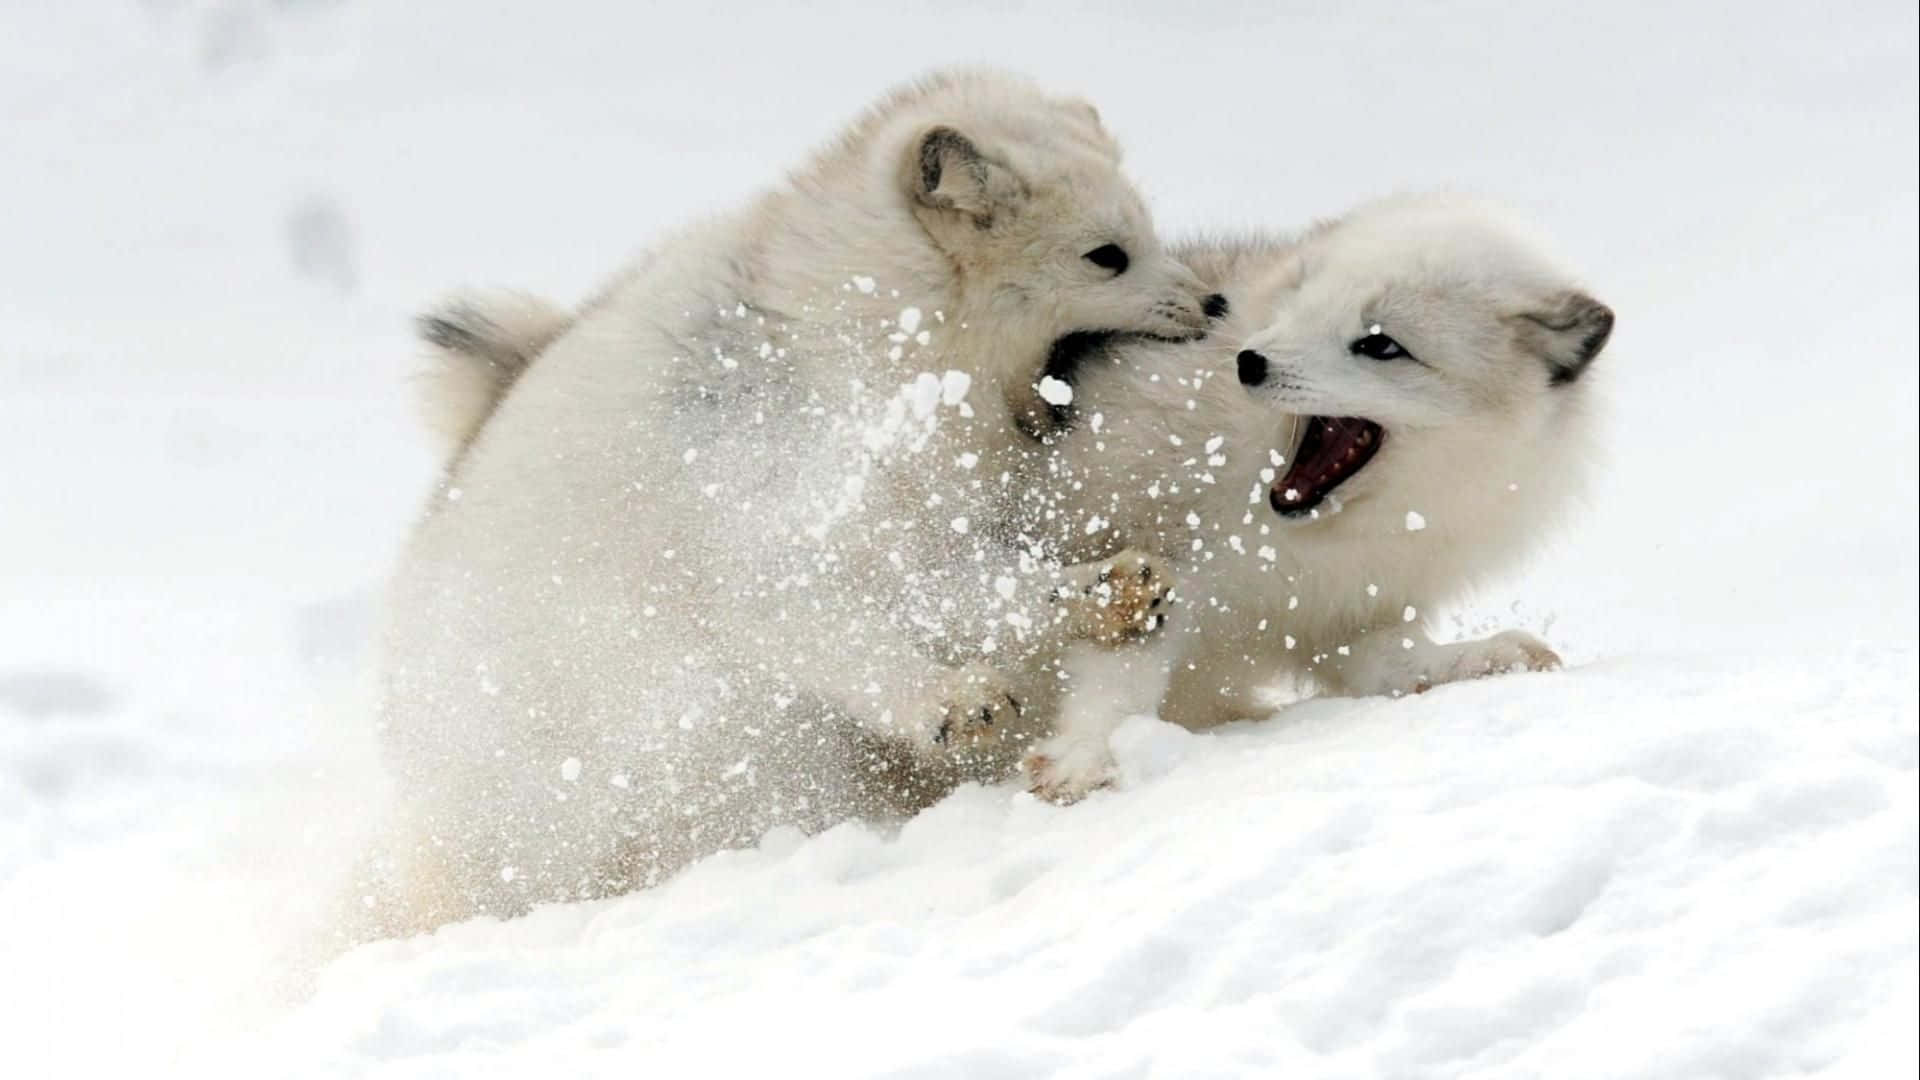 An adorable arctic fox, alone in the chilly winter air